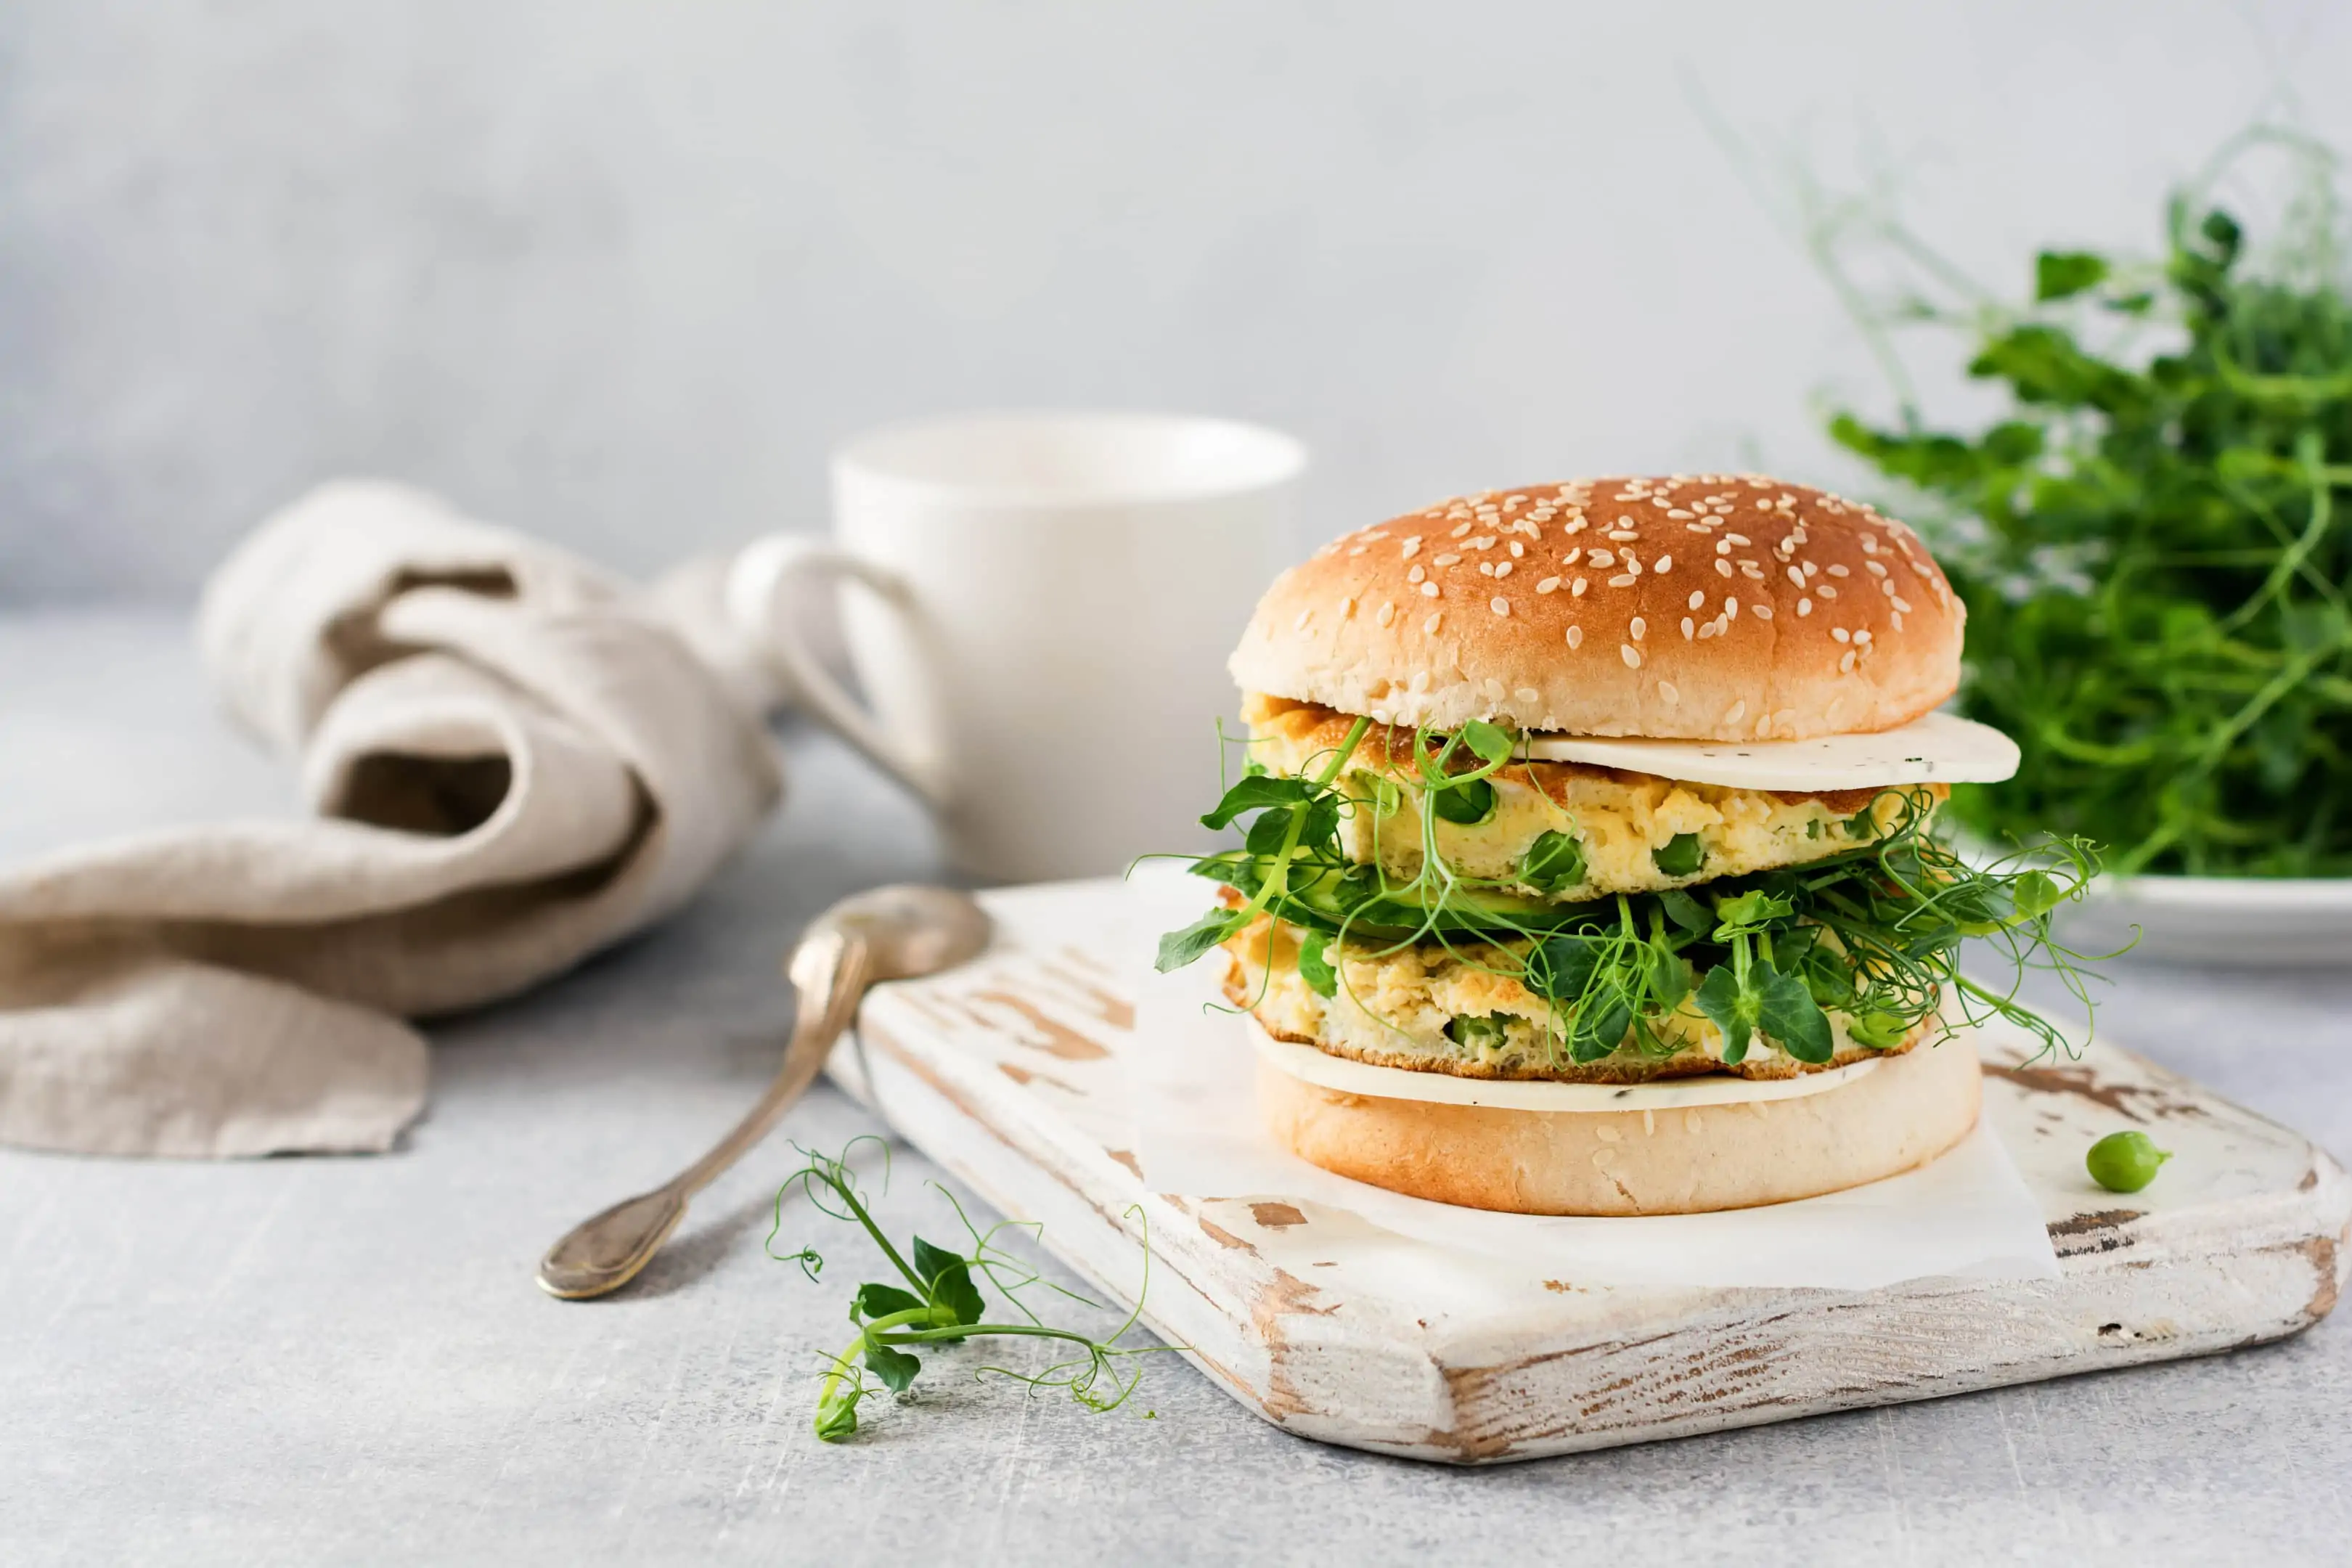 Vegetarian burger with egg and pea shoots on wooden cutting board